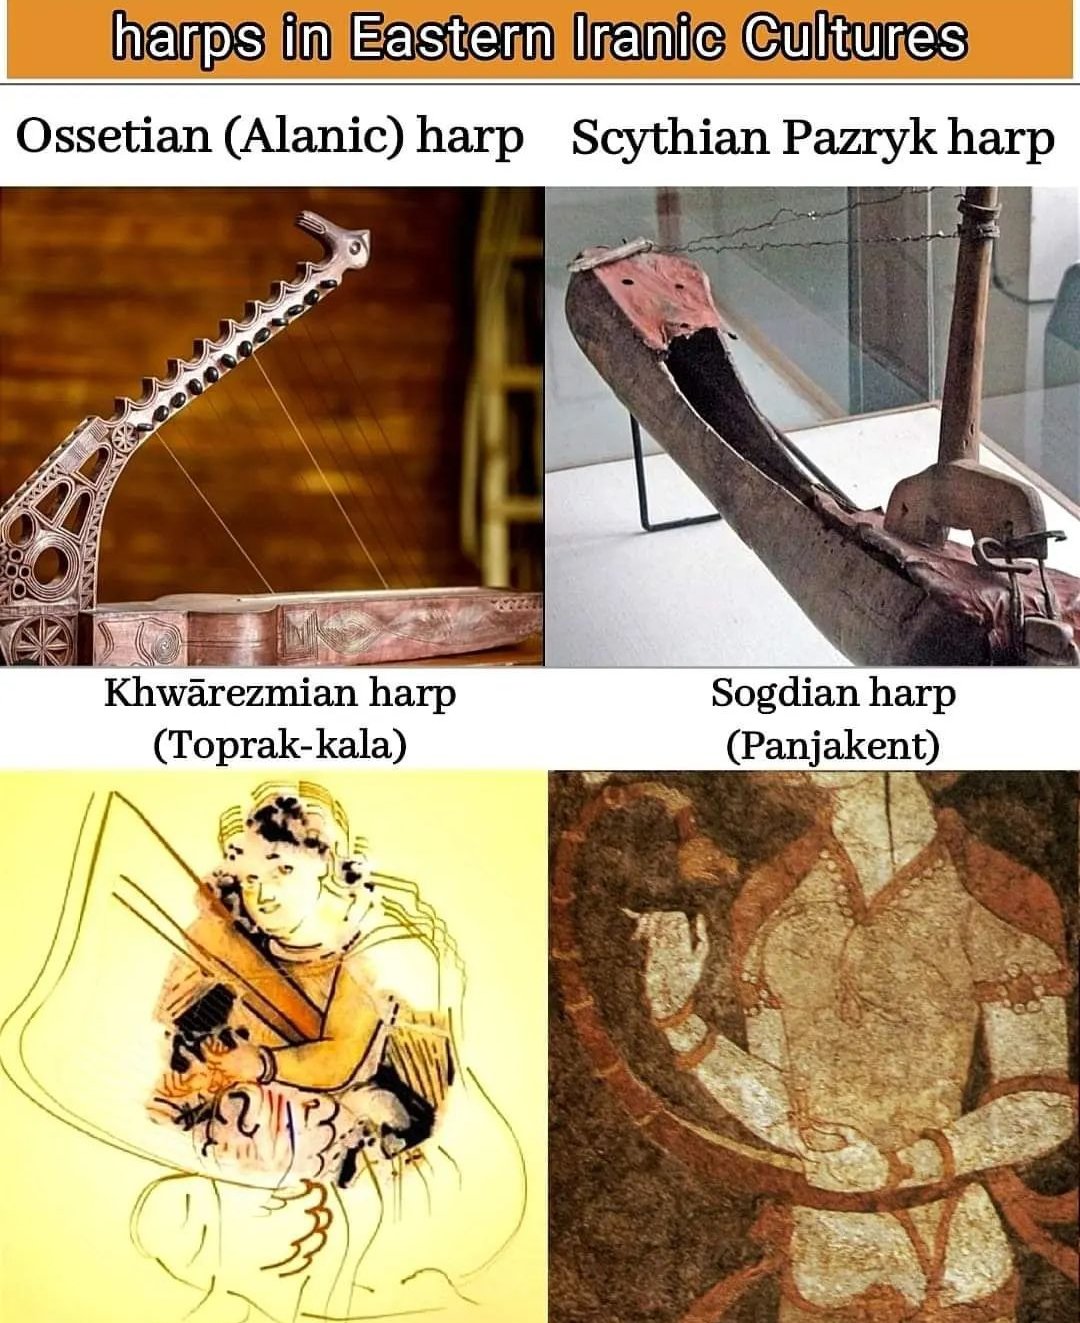 Archaeo - Histories on X: "Harps in Eastern Iranic Culture : The harp, also  known as the lyre, has a long history in the East Iranian cultures of  Scythia, Sogdiana, Khwarezmia and